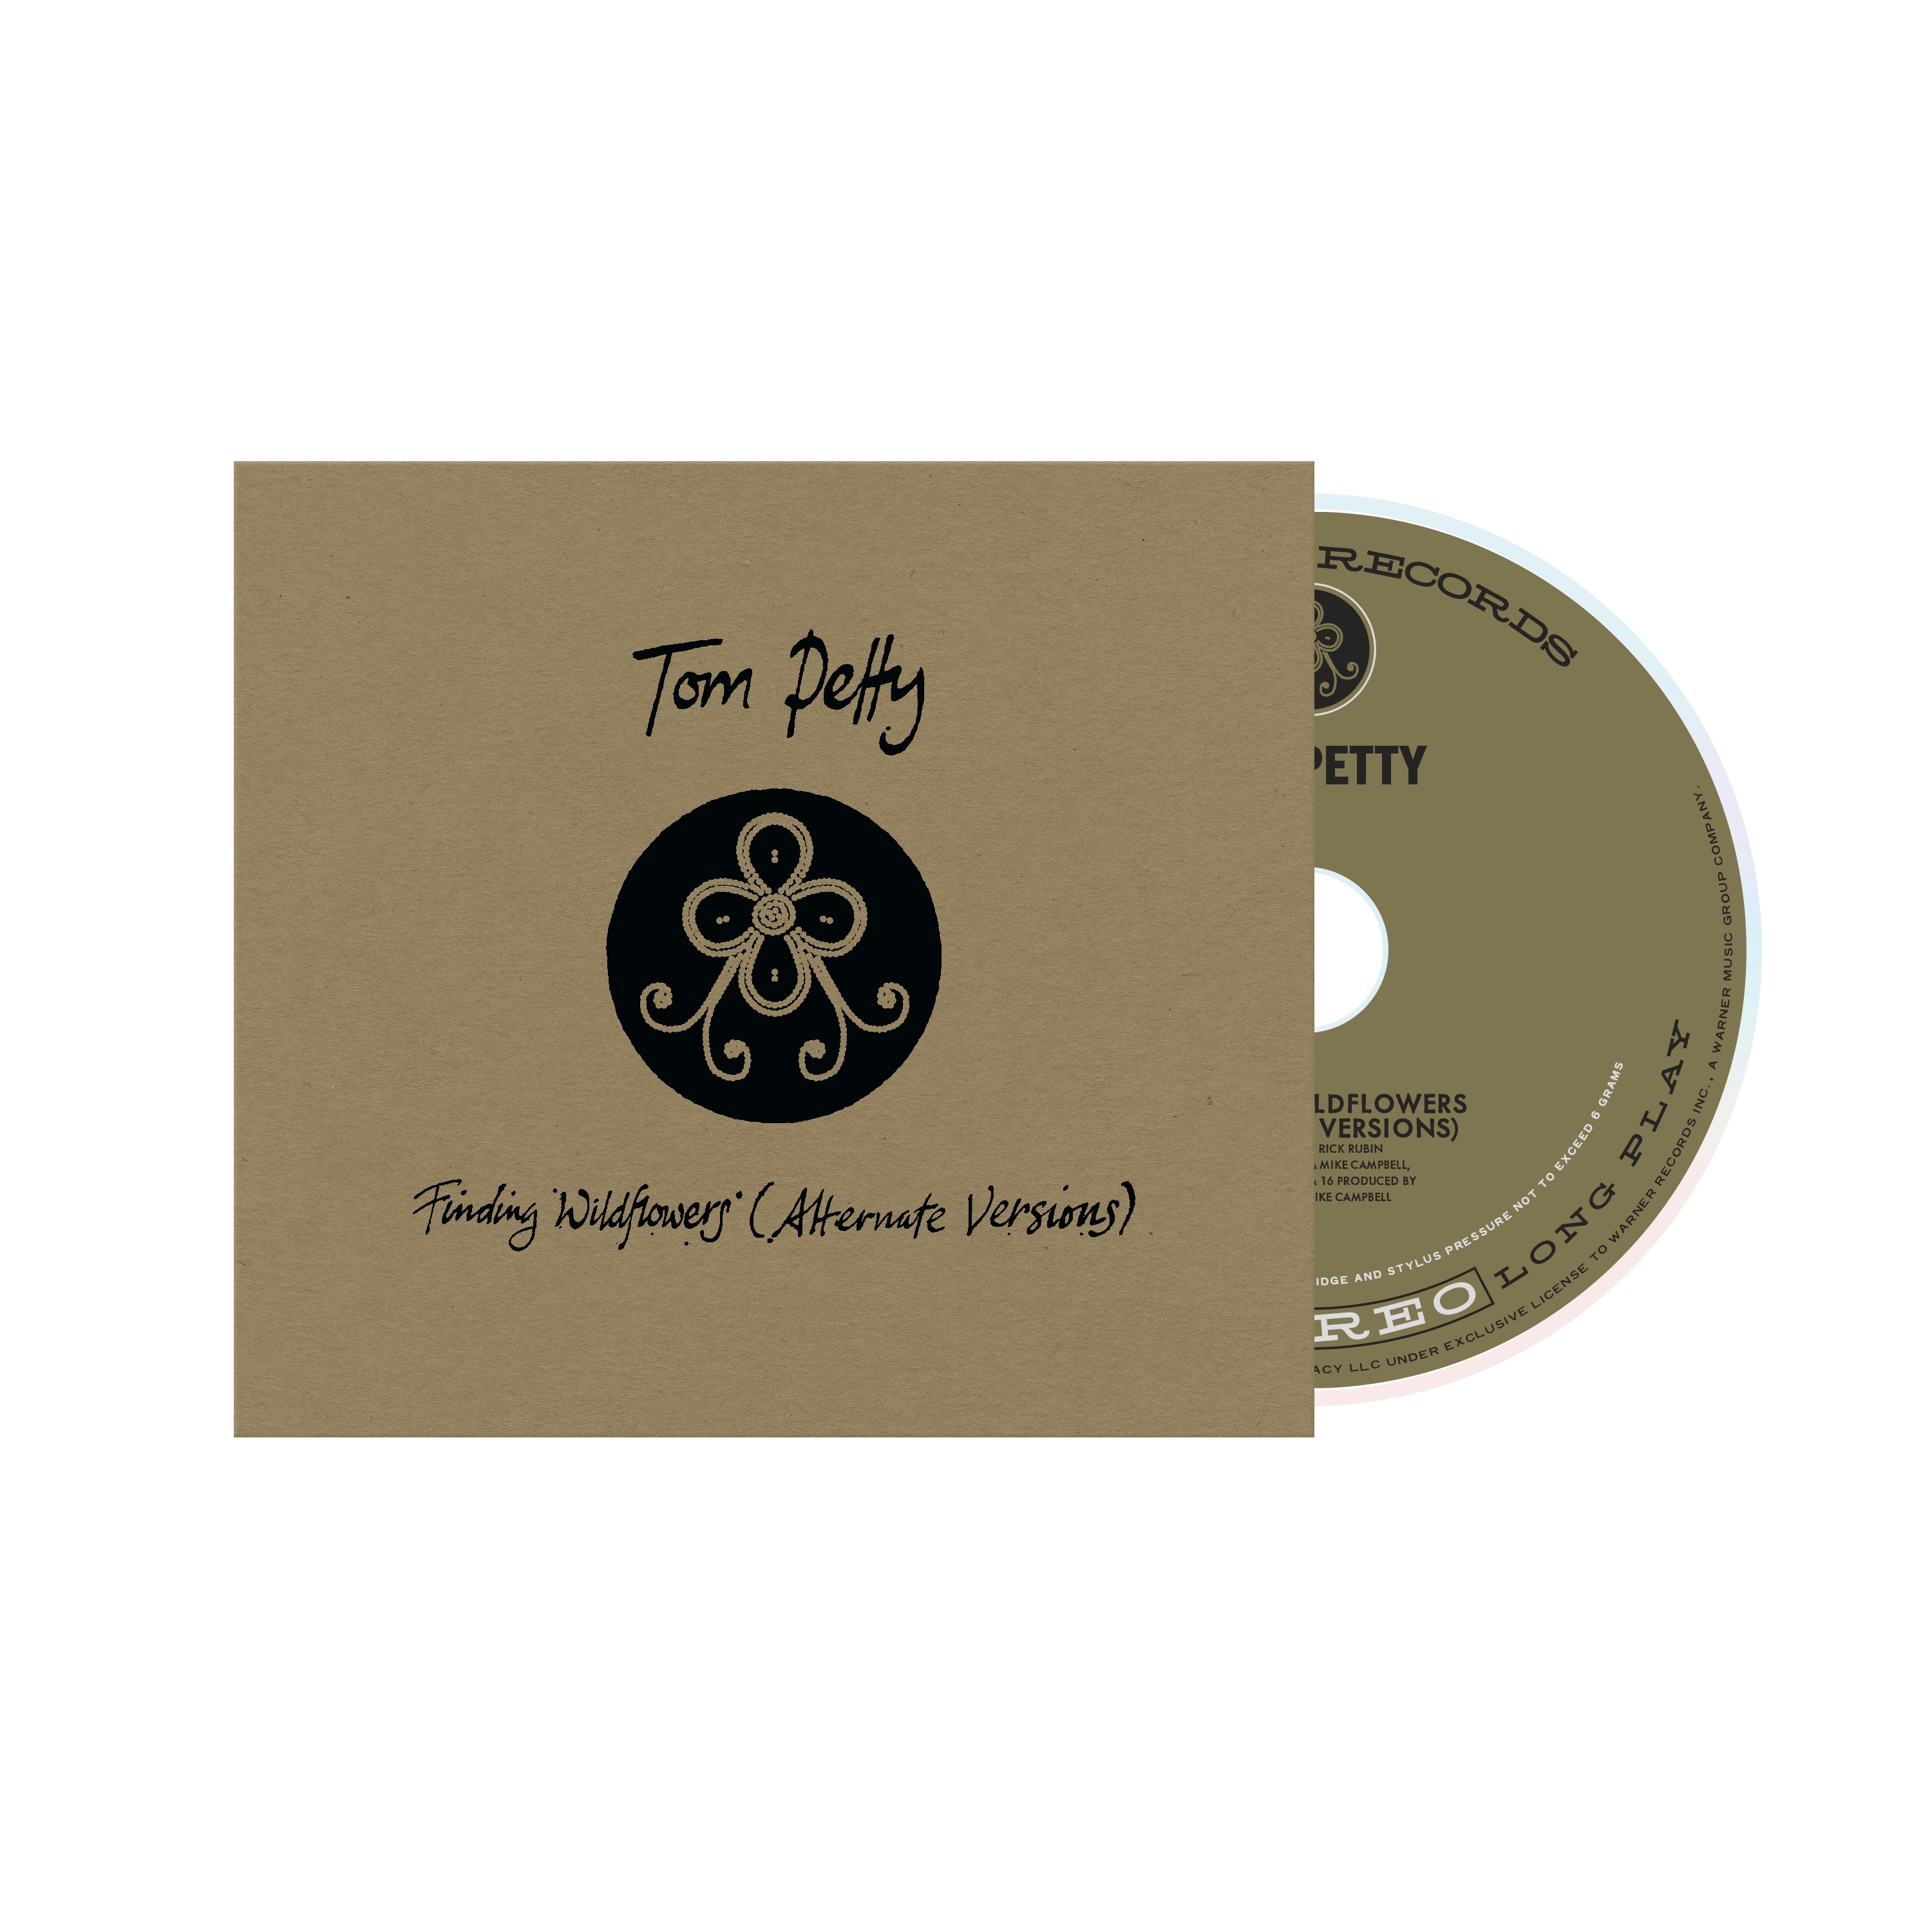 Album artwork for Finding Wildflowers (Alternate Versions) by Tom Petty